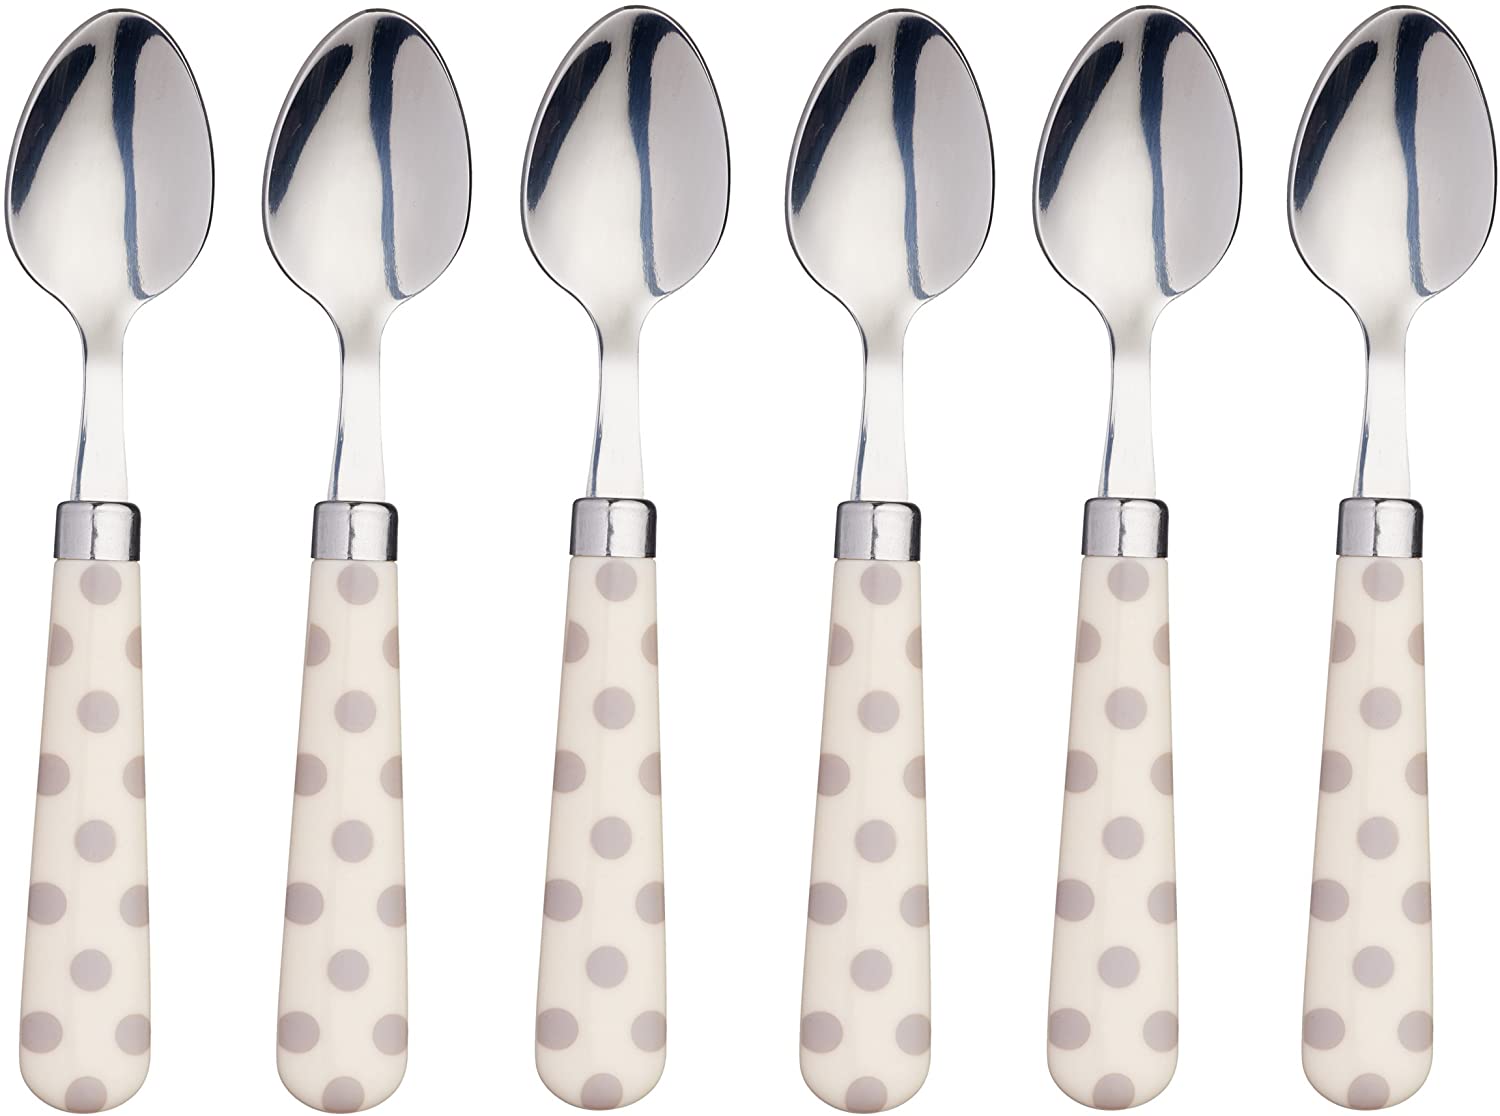 Kitchen Craft AMZTSPNSPOTTPSET6 Coloured Spotted Tea Spoon, Stainless Steel, Brown/Grey, 15.5 x 3 x 2 cm, 6 Units